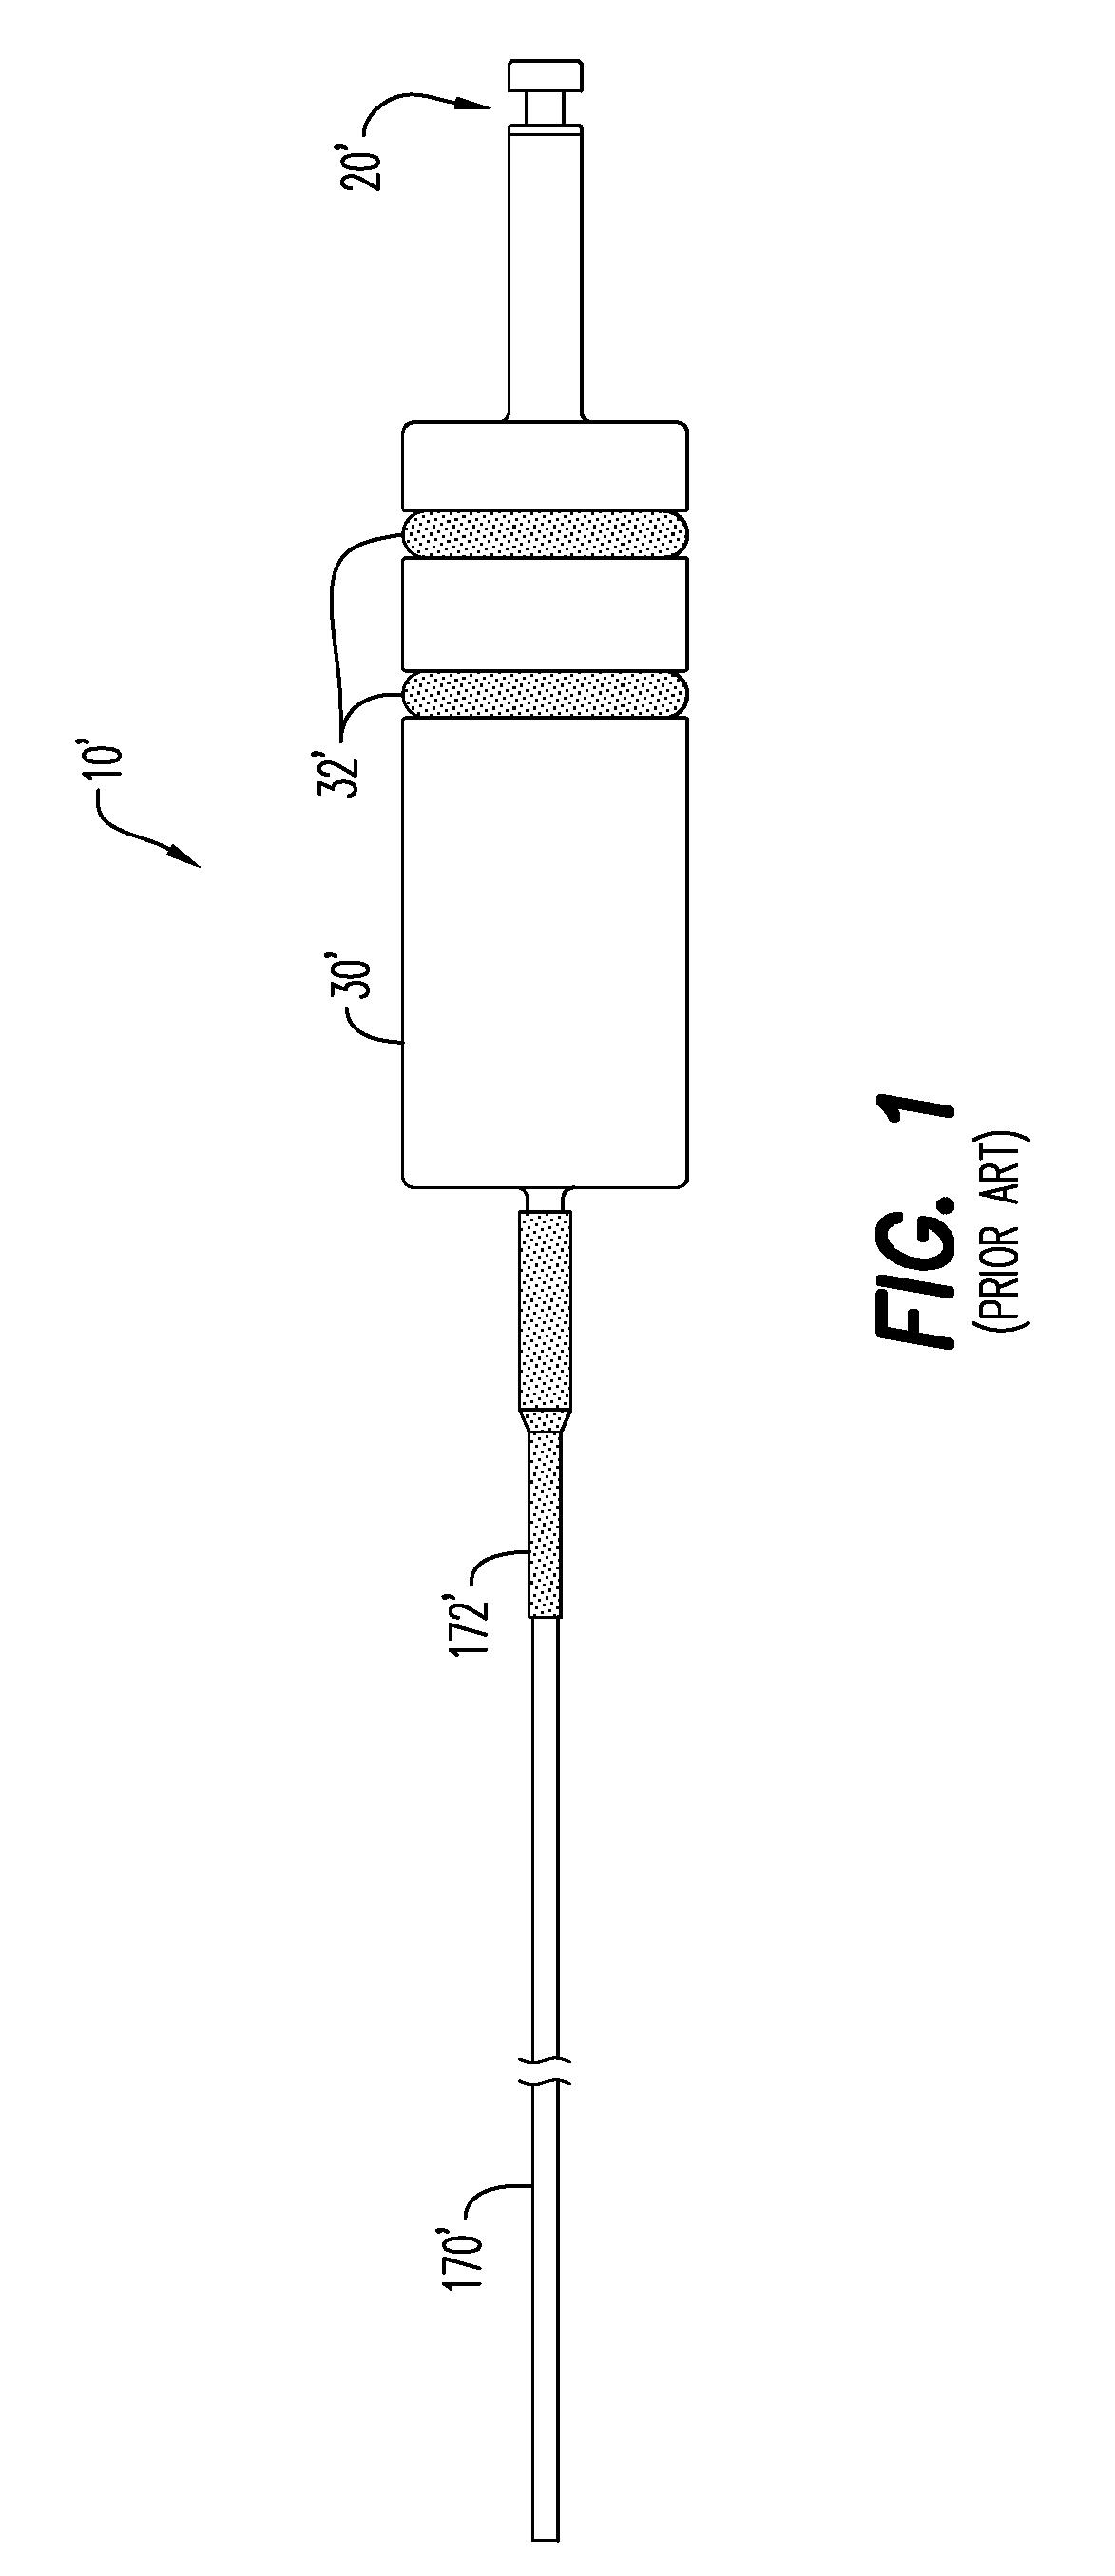 Bulkhead assembly having a pivotable electric contact component and integrated ground apparatus